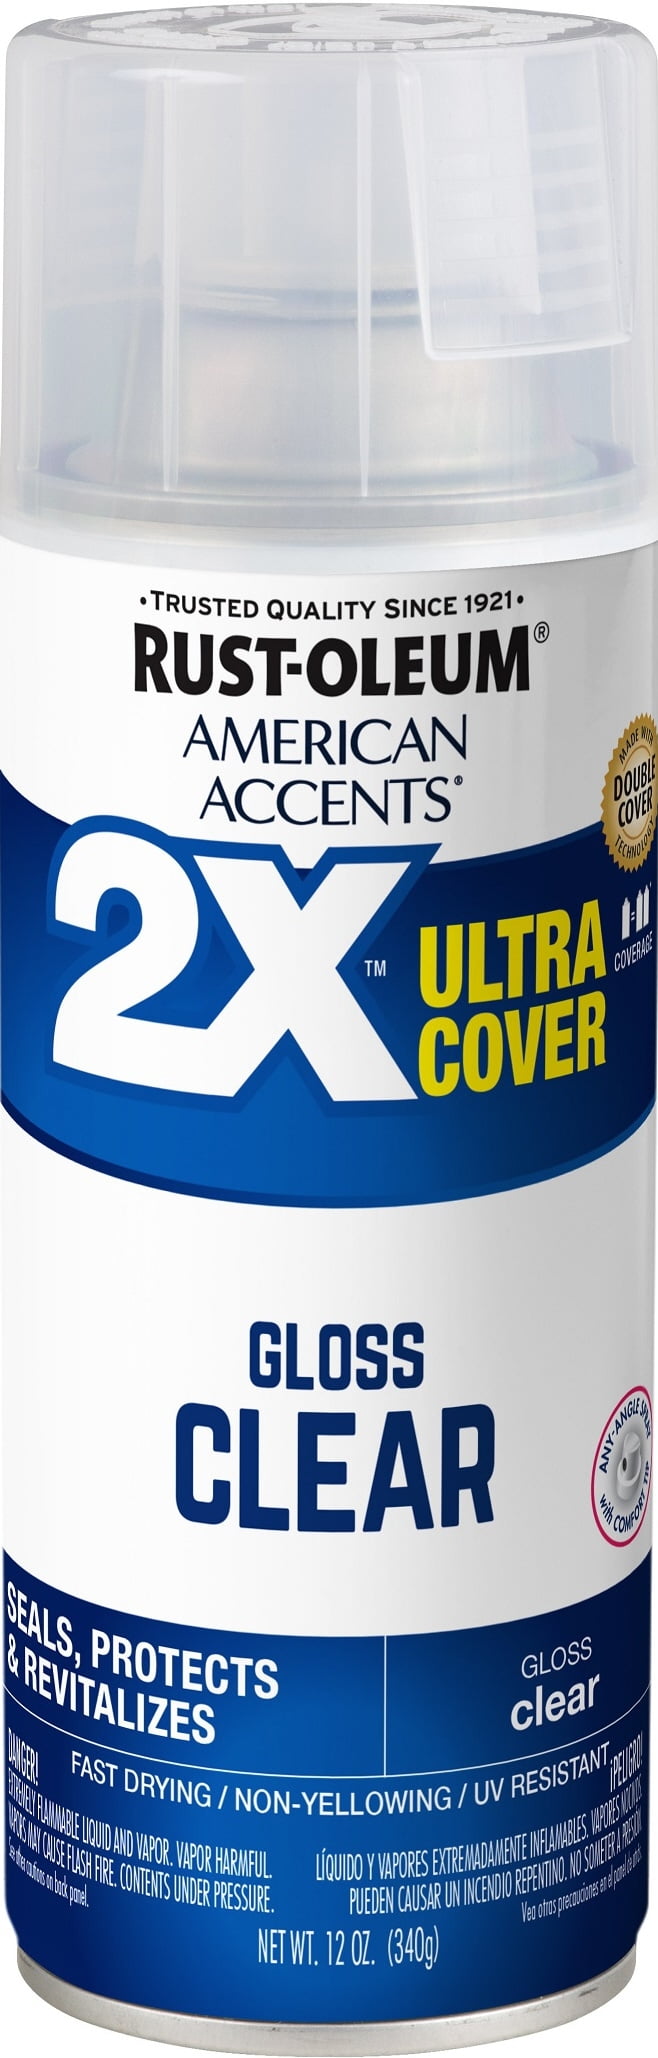 Clear, Rust-Oleum American Accents 2X Ultra Cover Gloss Spray Paint- 12 oz  